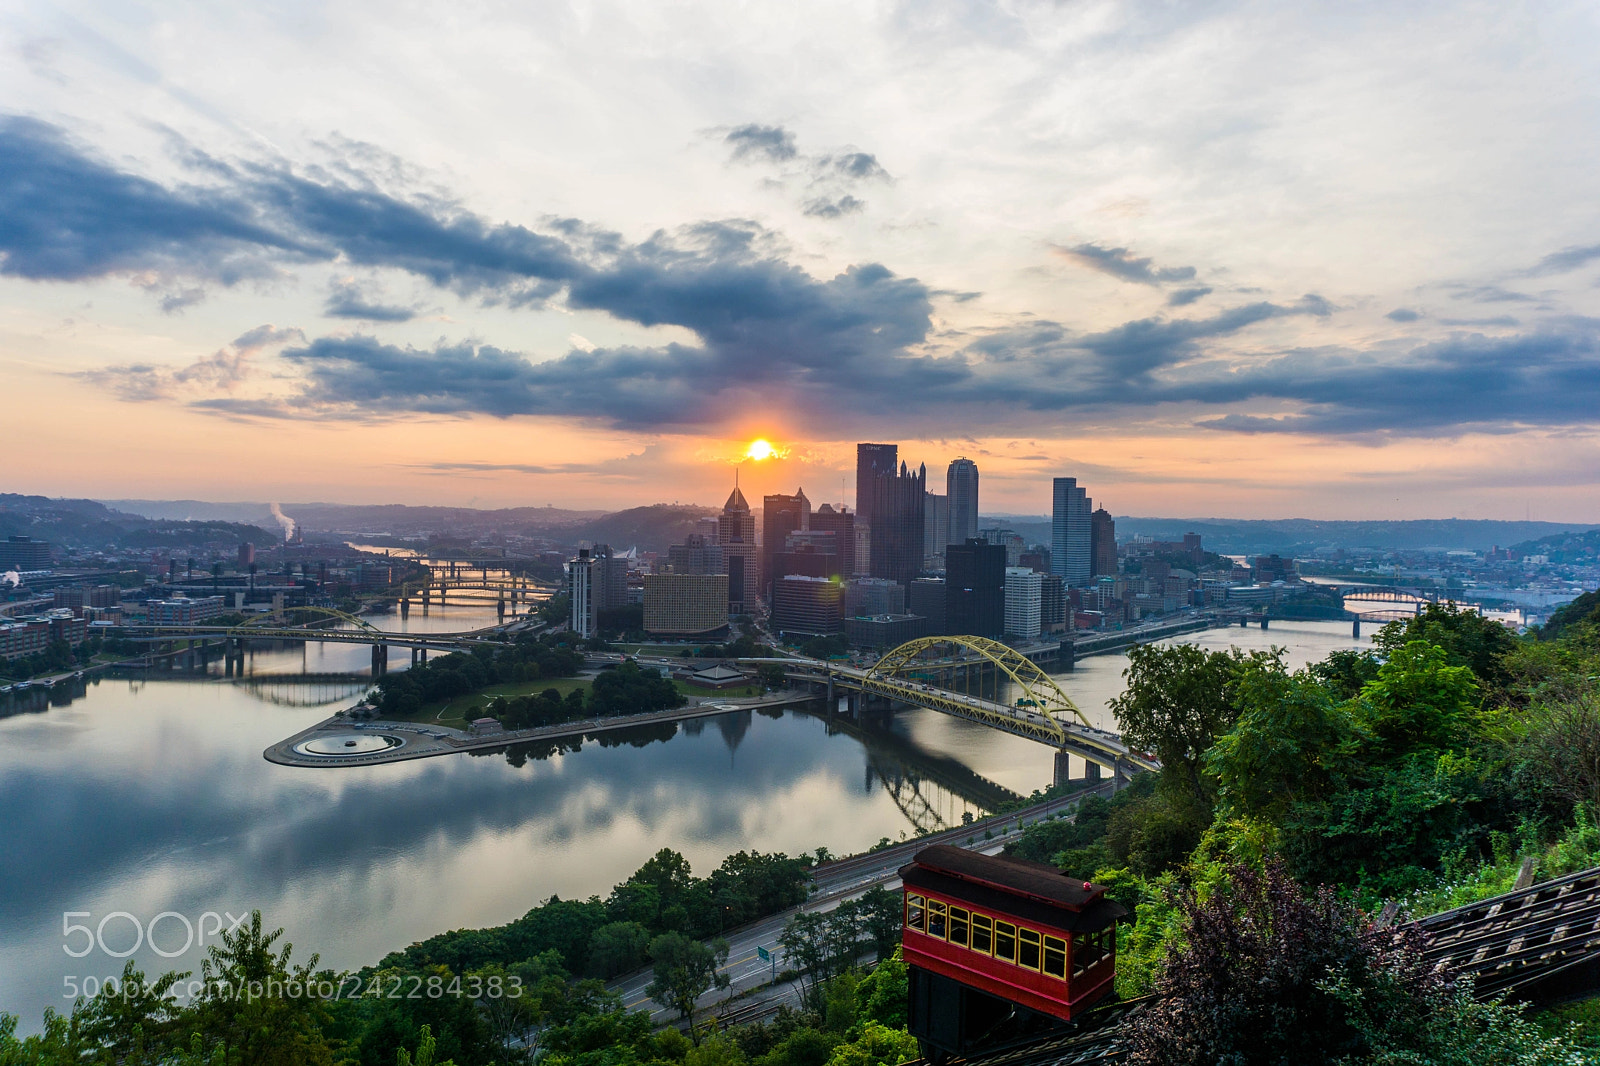 Sony a6000 sample photo. Duquesne incline cloudy sunrise photography